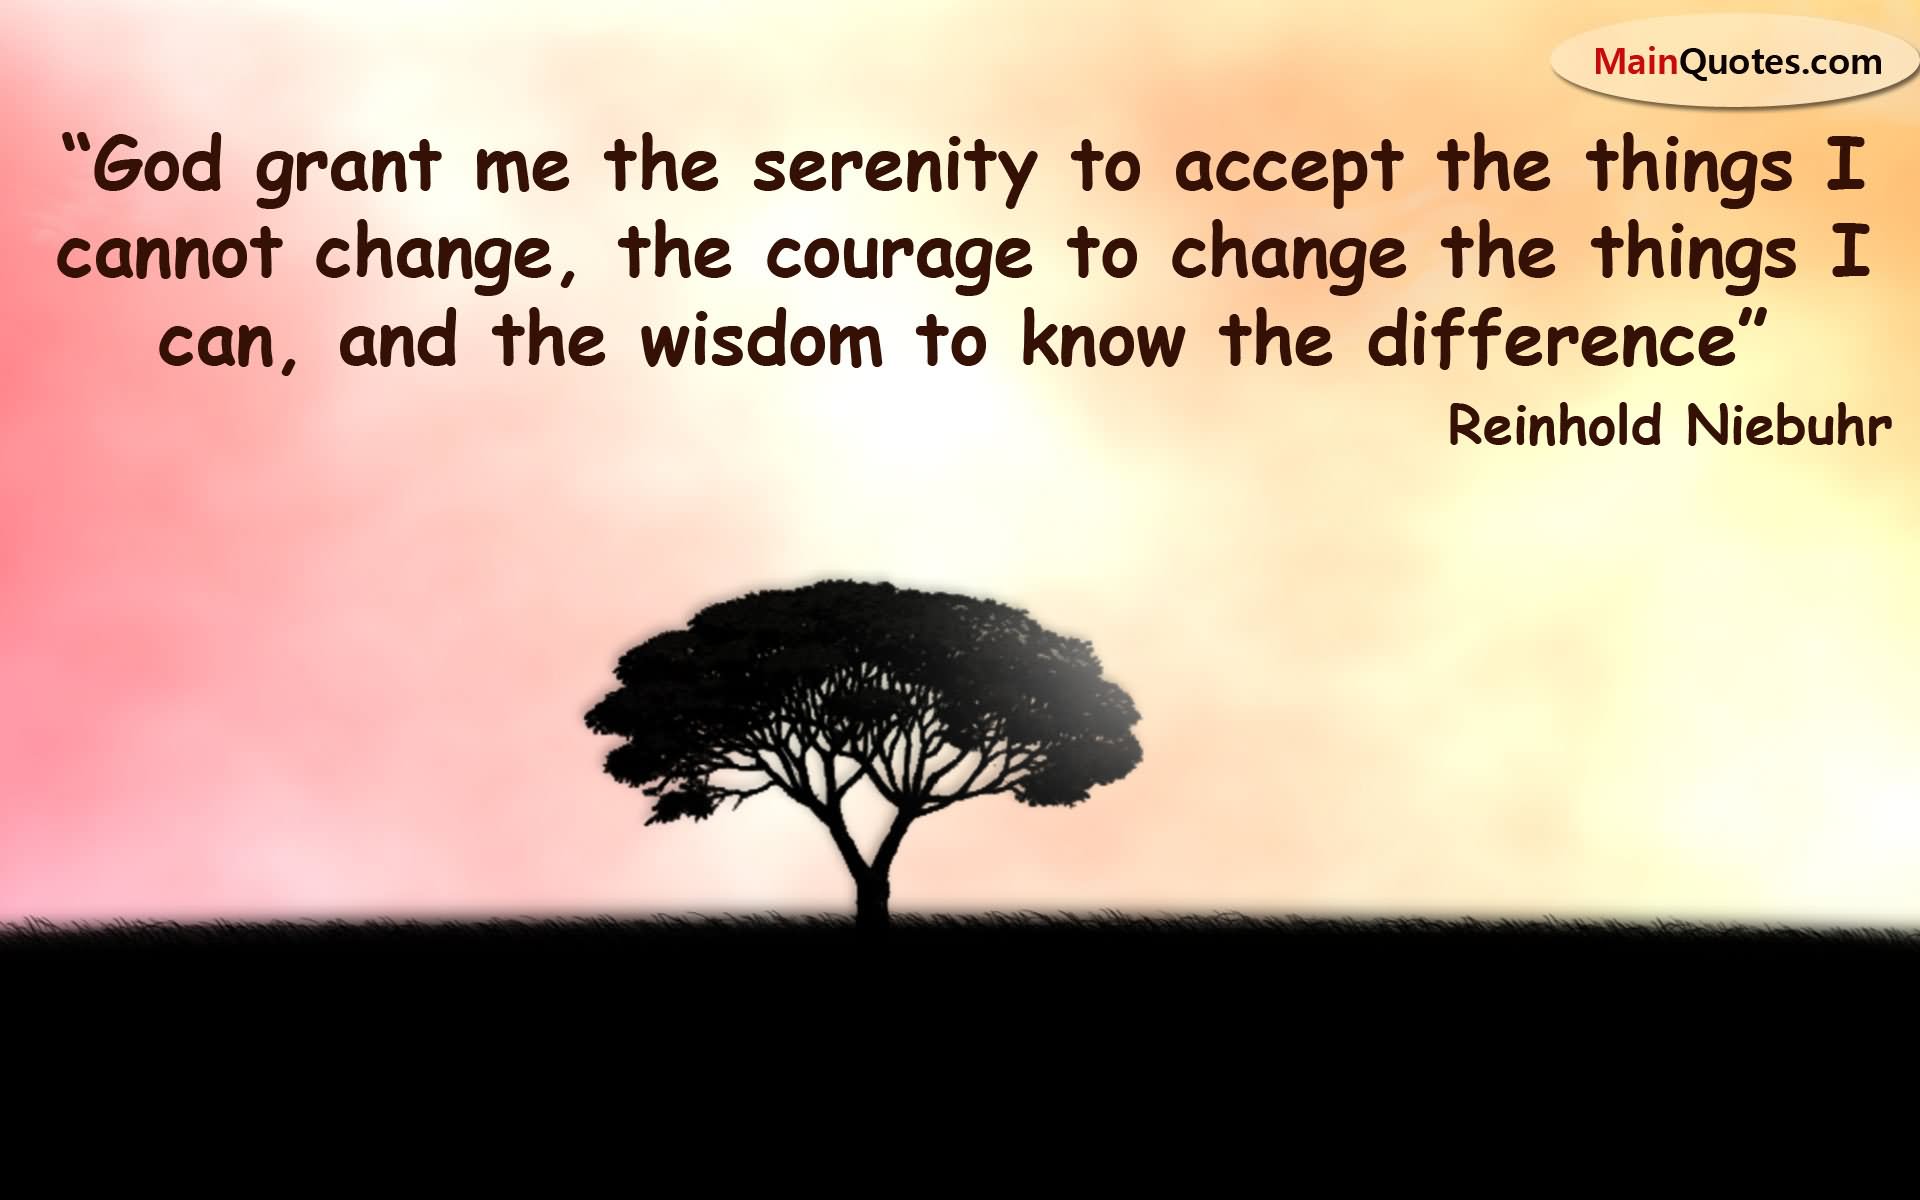 God grant me the serenity to accept the things I cannot change, the courage to change the things I can, and the wisdom to know the difference. (4)